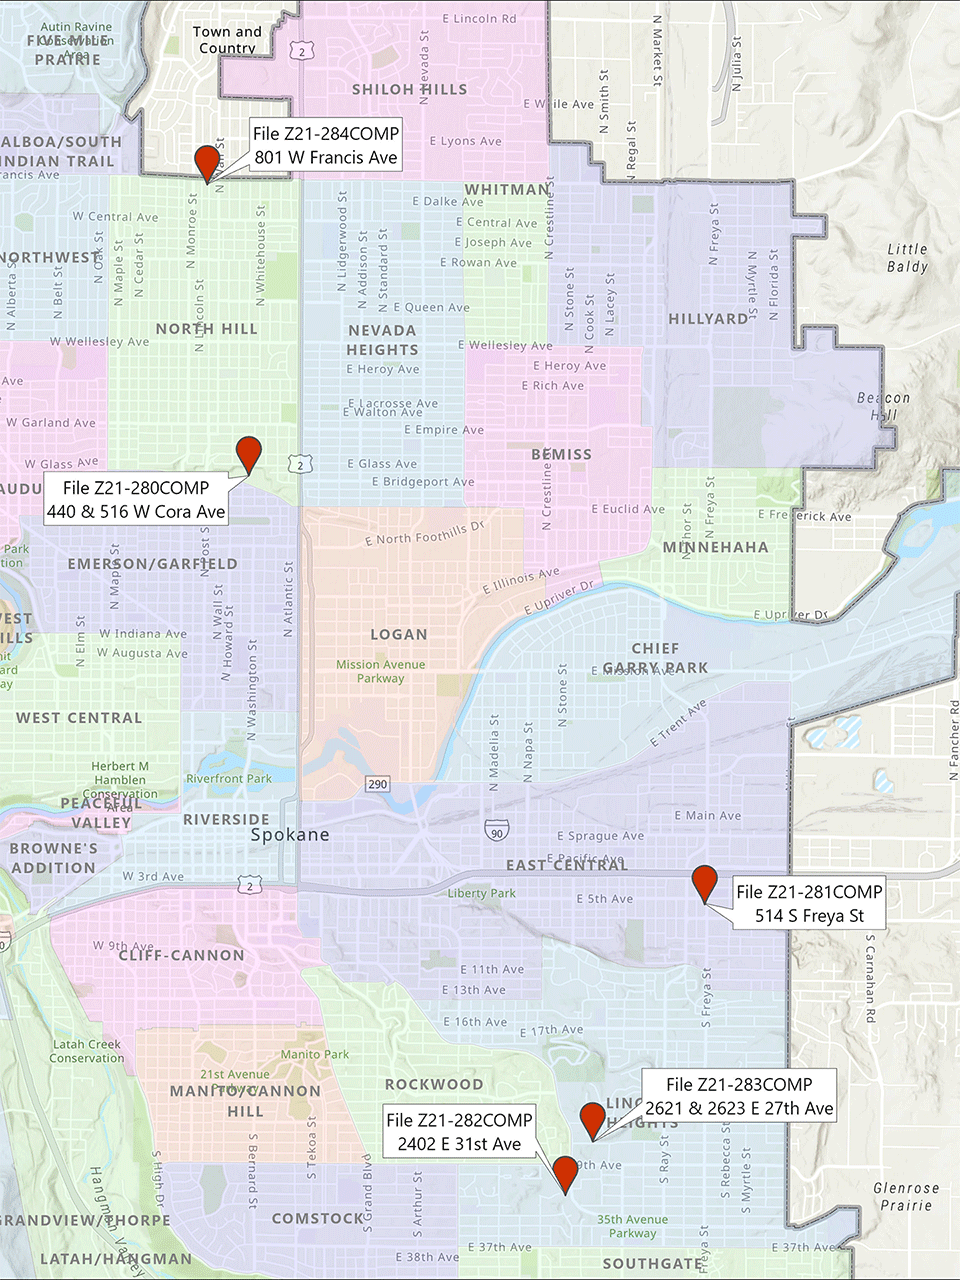 A map of Spokane showing a drop pin for each private application under review for the 2021/2022 Comprehensive Plan Amendments cycle.